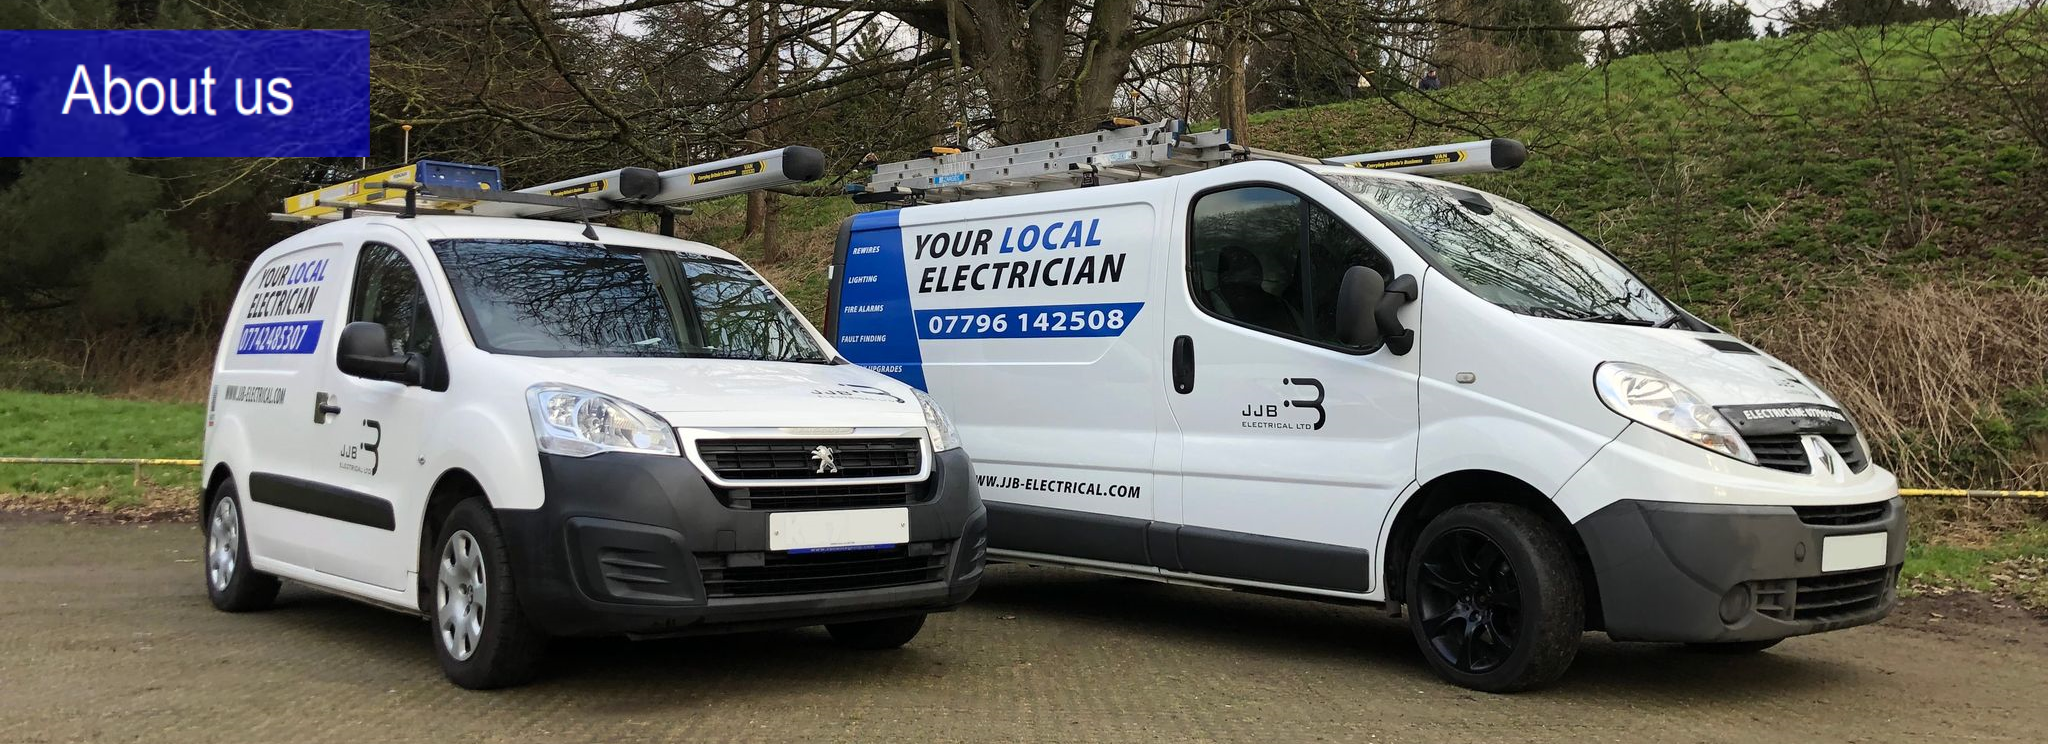 About JJB - Electricians in Hertfordshire and Essex